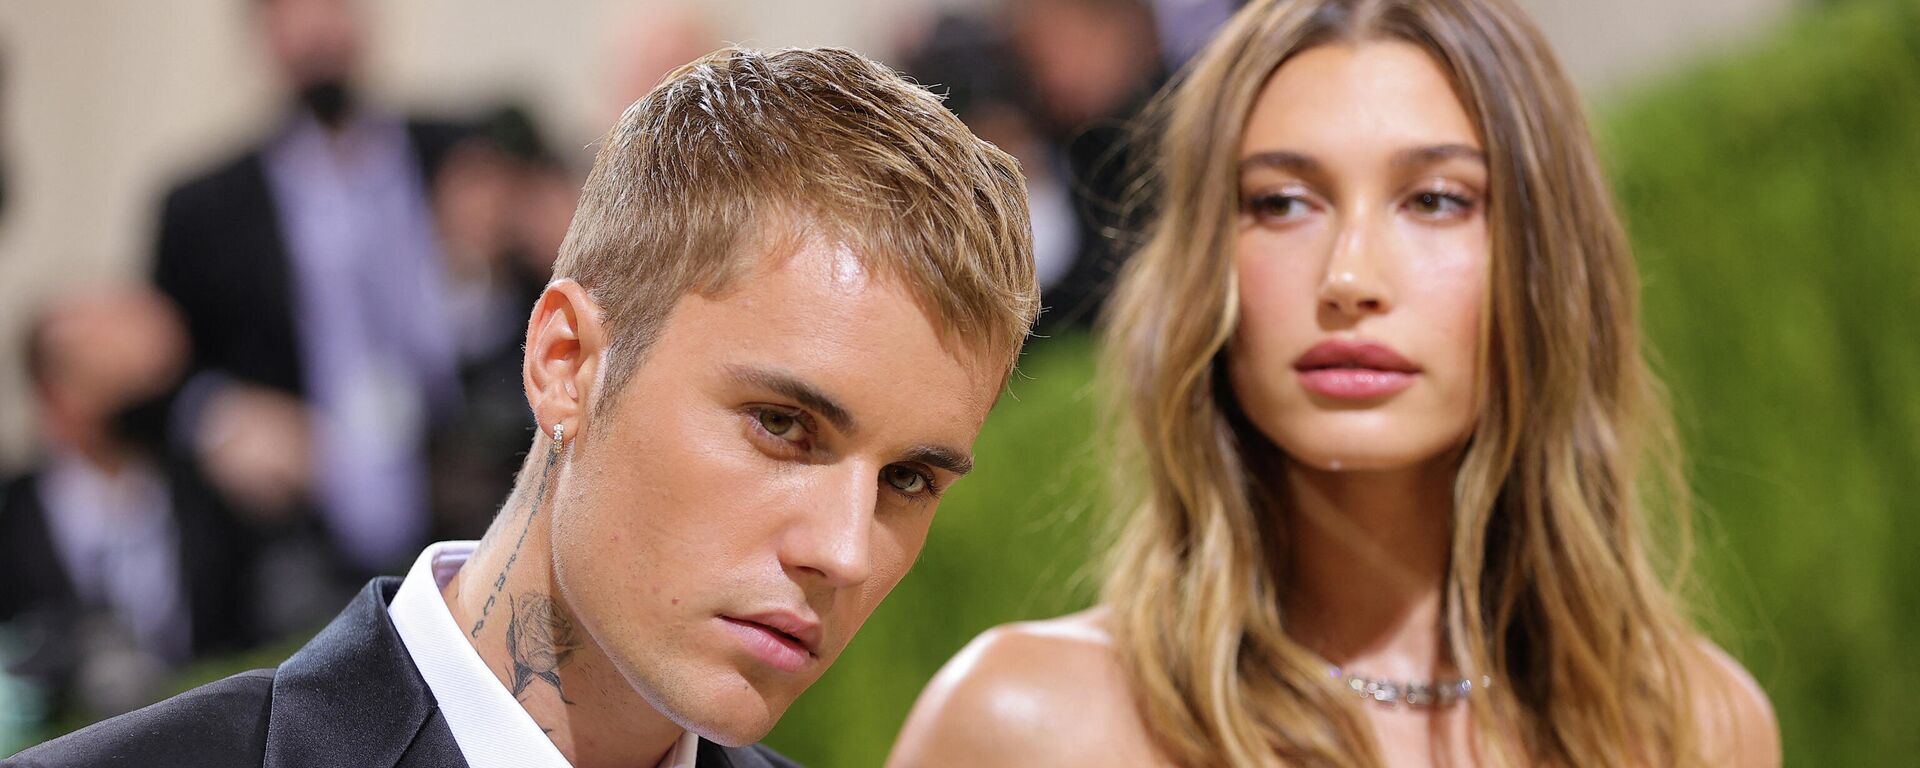 NEW YORK, NEW YORK - SEPTEMBER 13: Justin Bieber and Hailey Bieber attend The 2021 Met Gala Celebrating In America: A Lexicon Of Fashion at Metropolitan Museum of Art on September 13, 2021 in New York City.  - Sputnik International, 1920, 15.03.2022